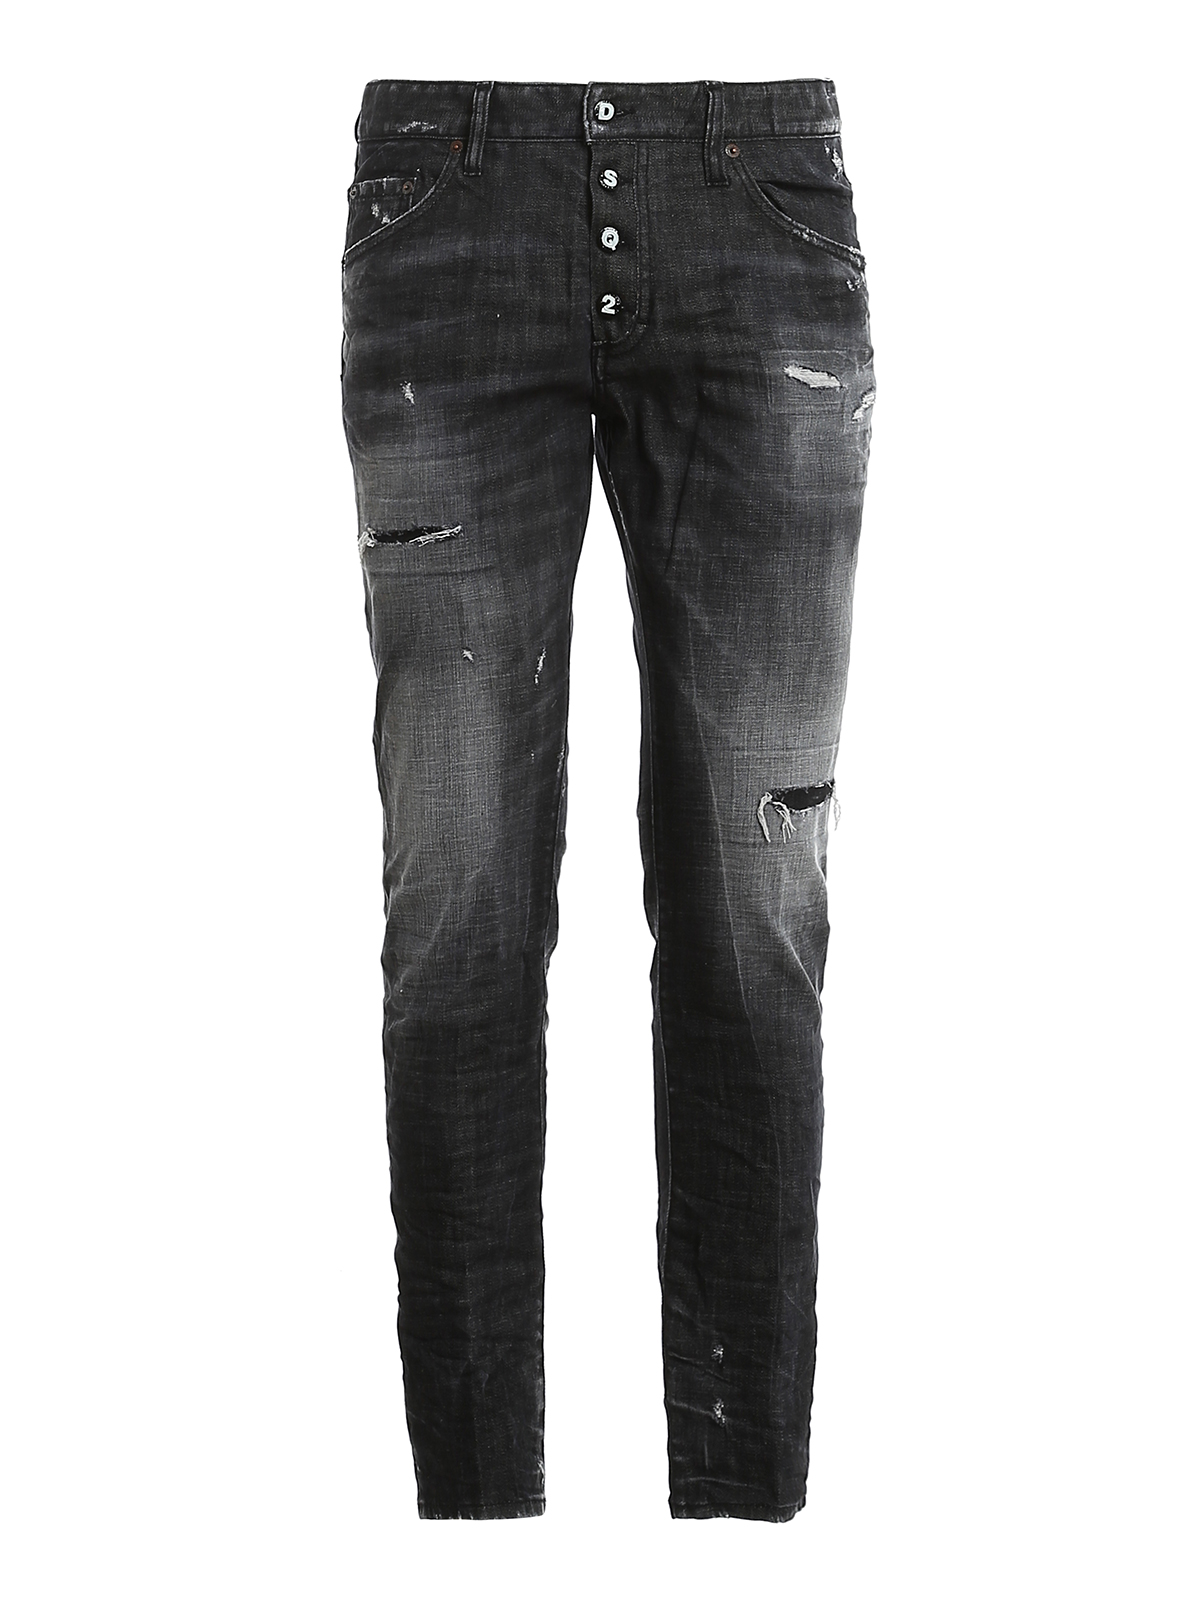 Straight leg jeans Dsquared2 - Skater ripped jeans - S74LB0783S30357900